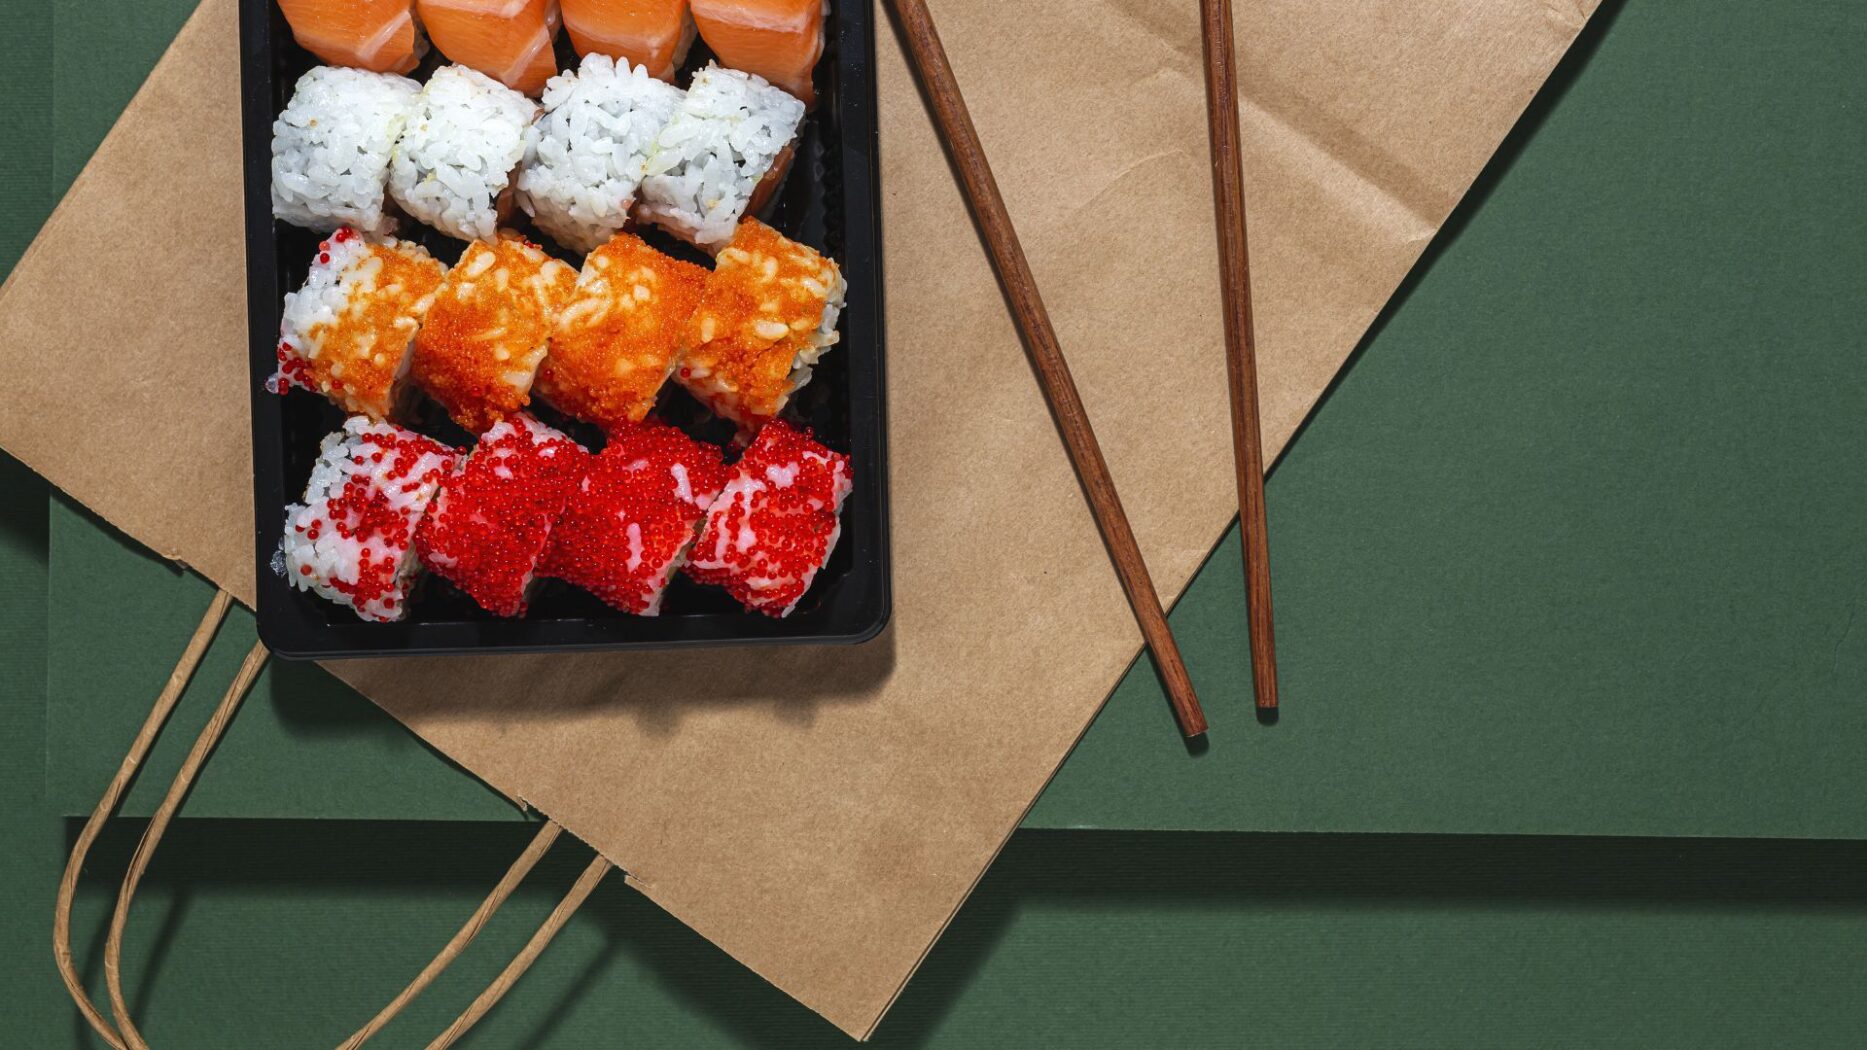 Take-out sushi and bag